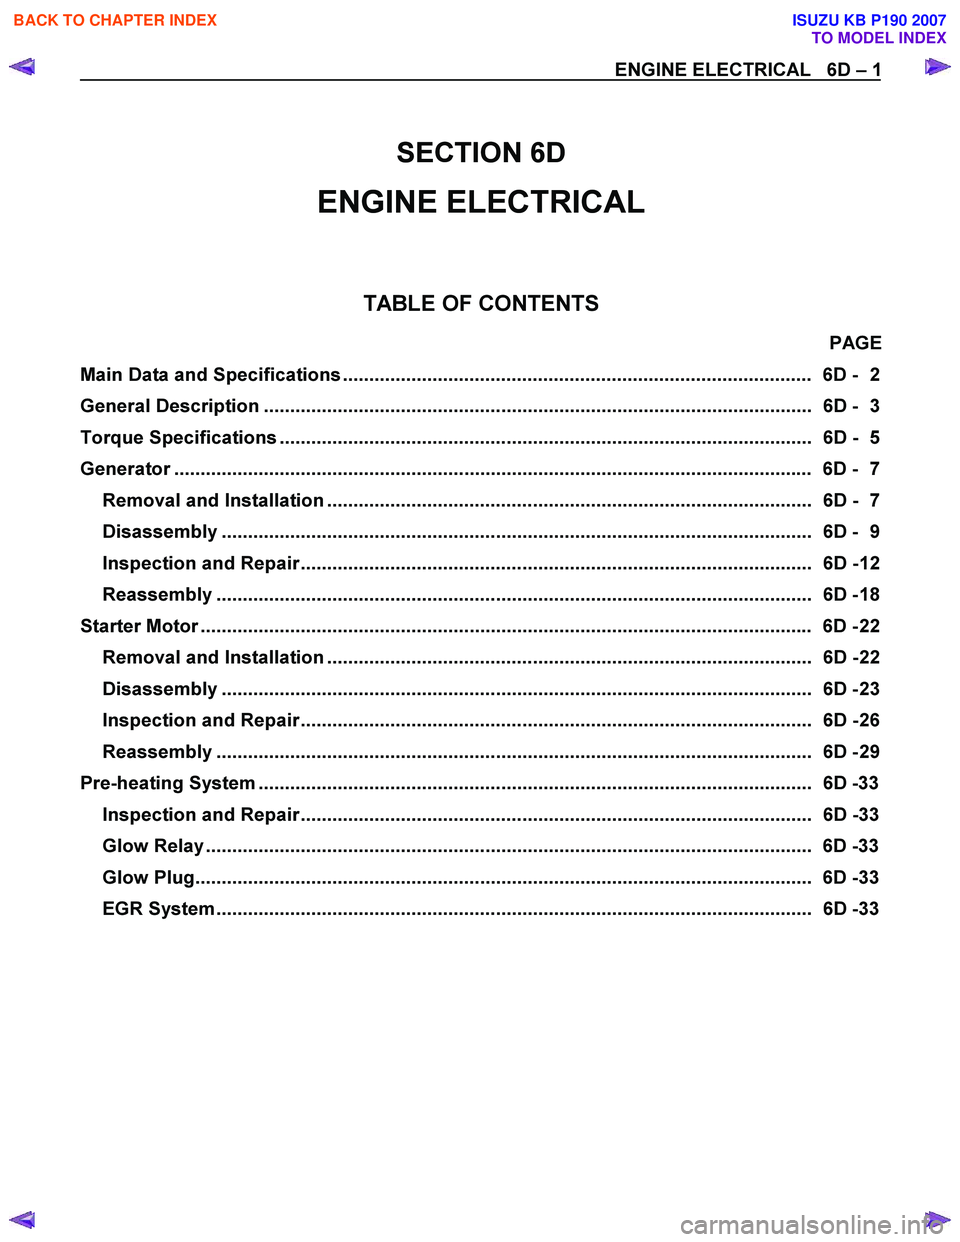 ISUZU KB P190 2007  Workshop Repair Manual   
 
SECTION 6D 
ENGINE ELECTRICAL 
  
 
TABLE OF CONTENTS 
PAGE 
Main Data and Specifications .........................................................................................   6D -  2  
Gen